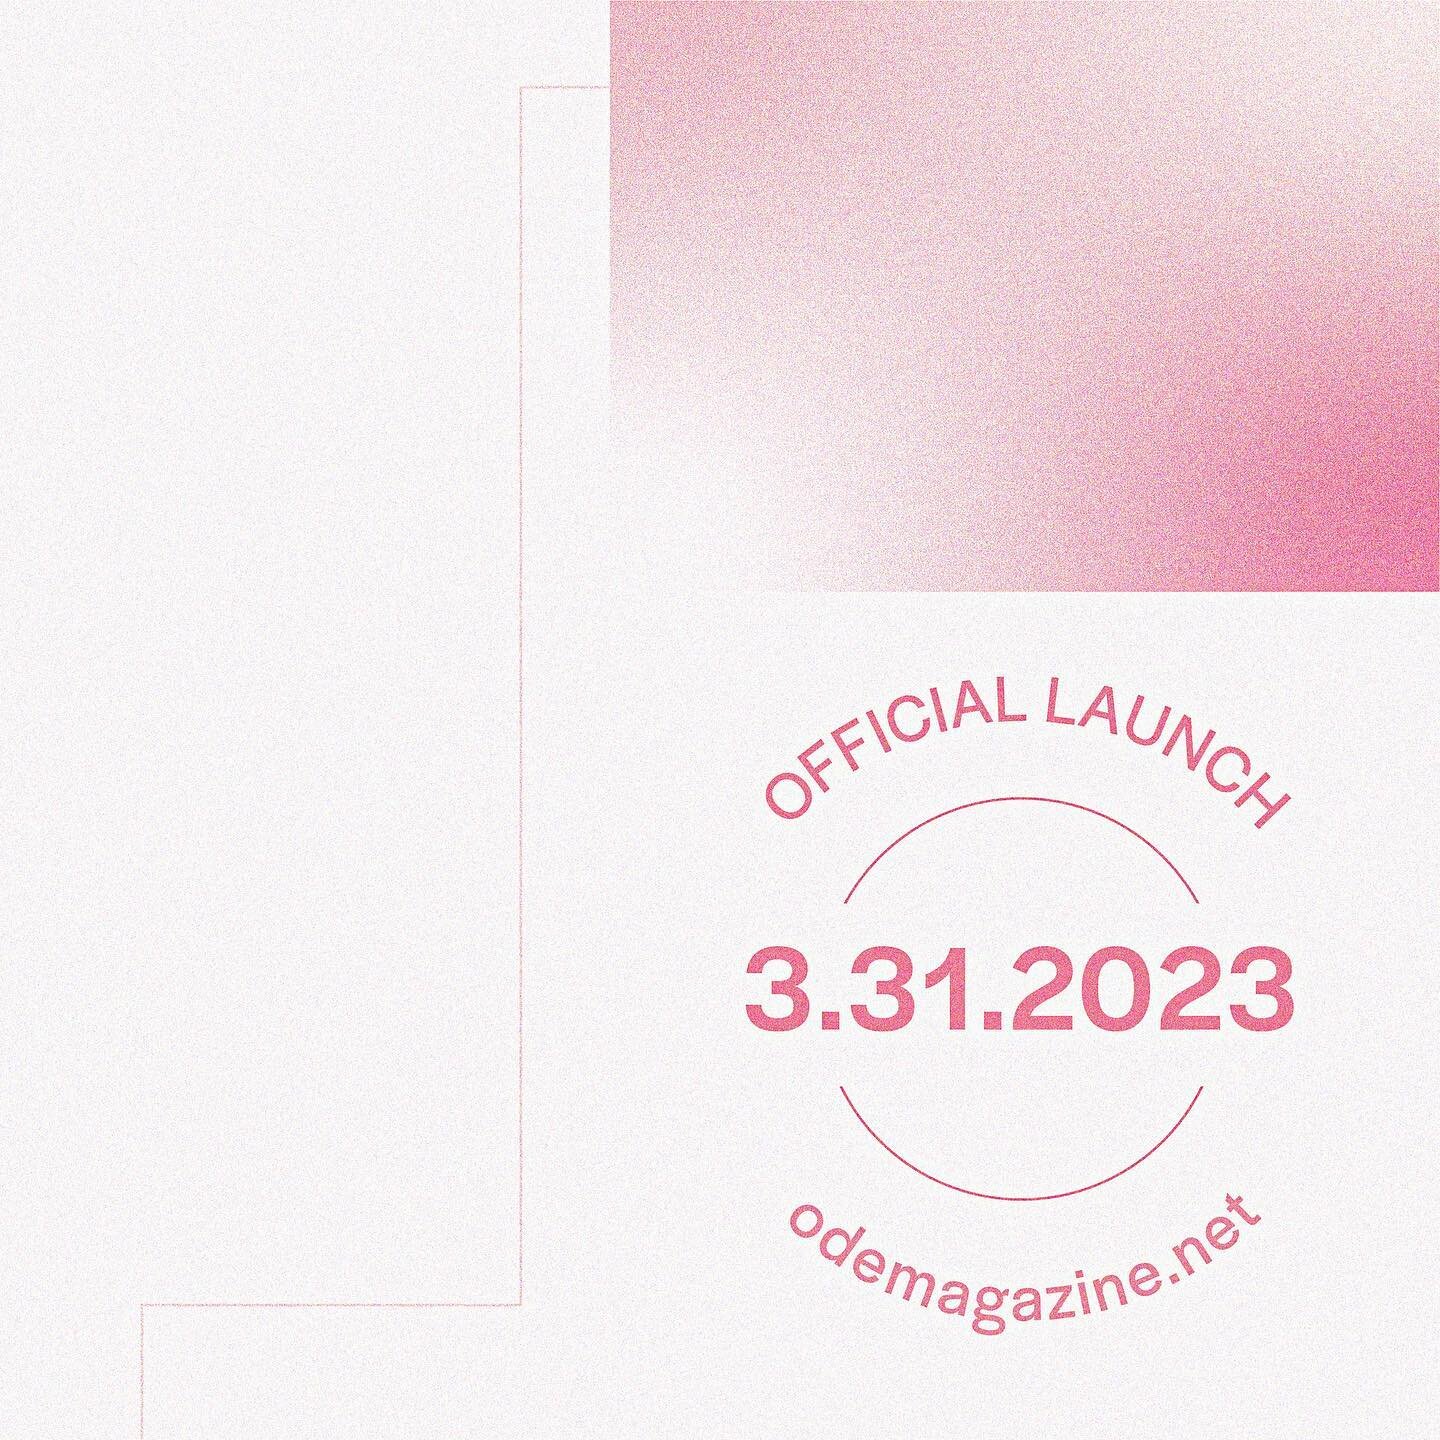 The countdown starts now&mdash; We&rsquo;re 2 weeks away from our official launch!

#odemagazine